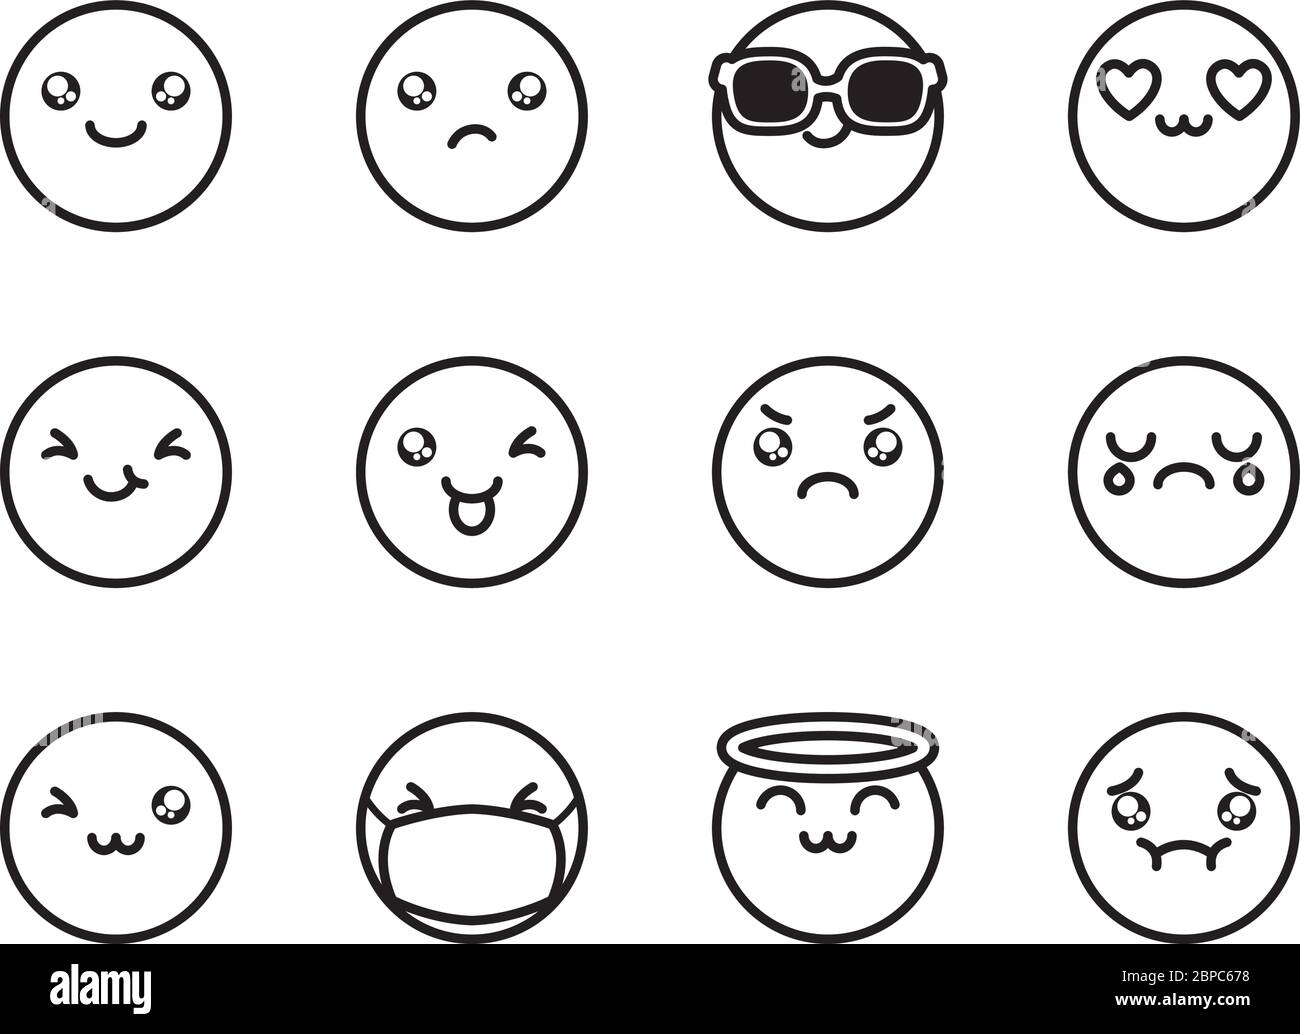 angel emoji and emojis icon set over white background, line style, vector illustration Stock Vector